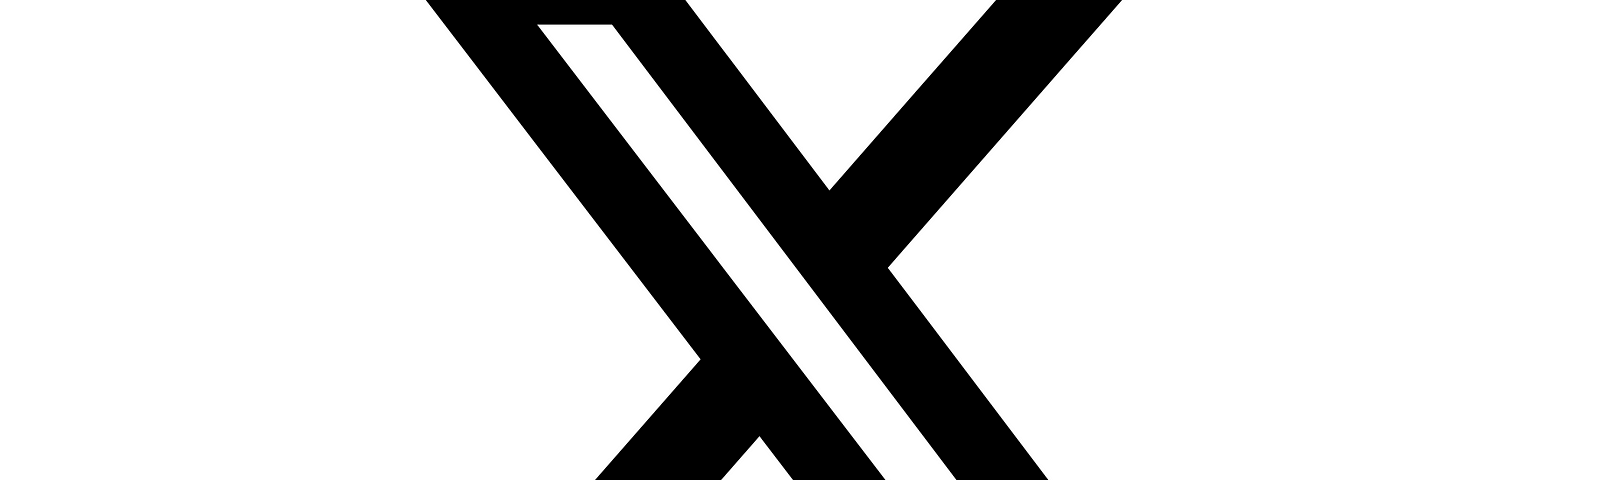 X Corp logo. It’s just a letter.